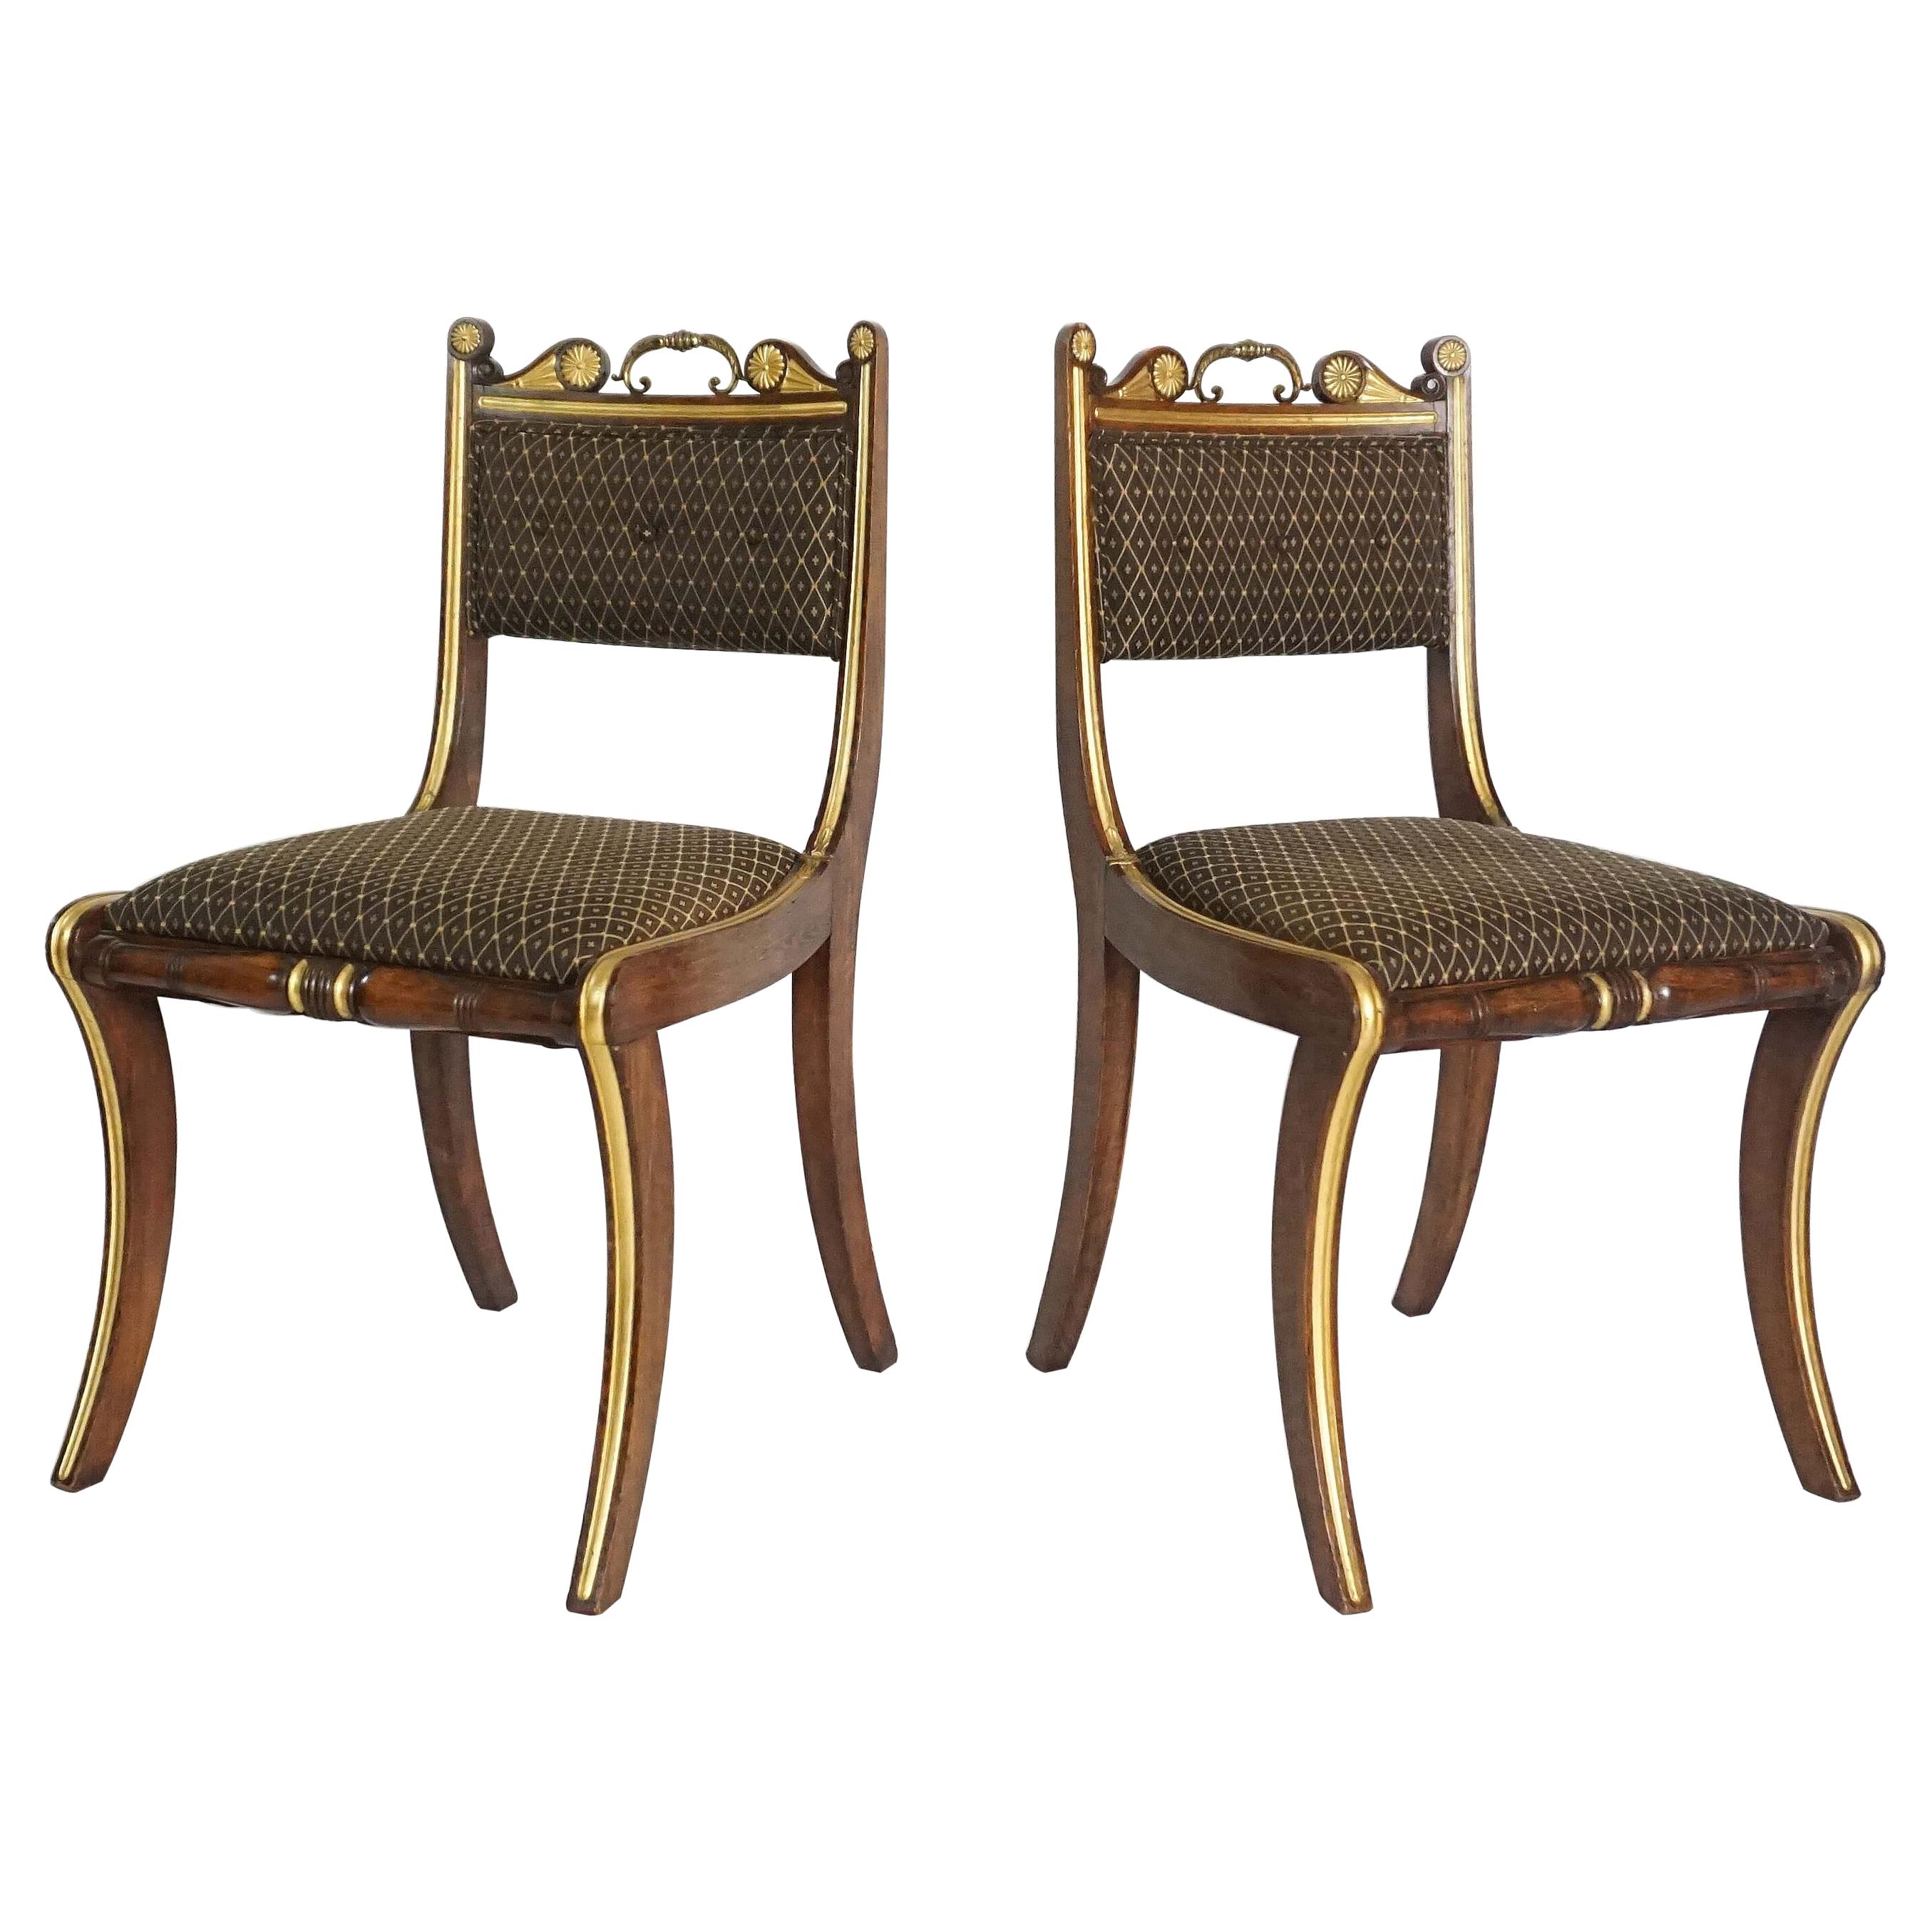 Pair of English Regency Side Chairs attributed to Morel & Hughes, circa 1815